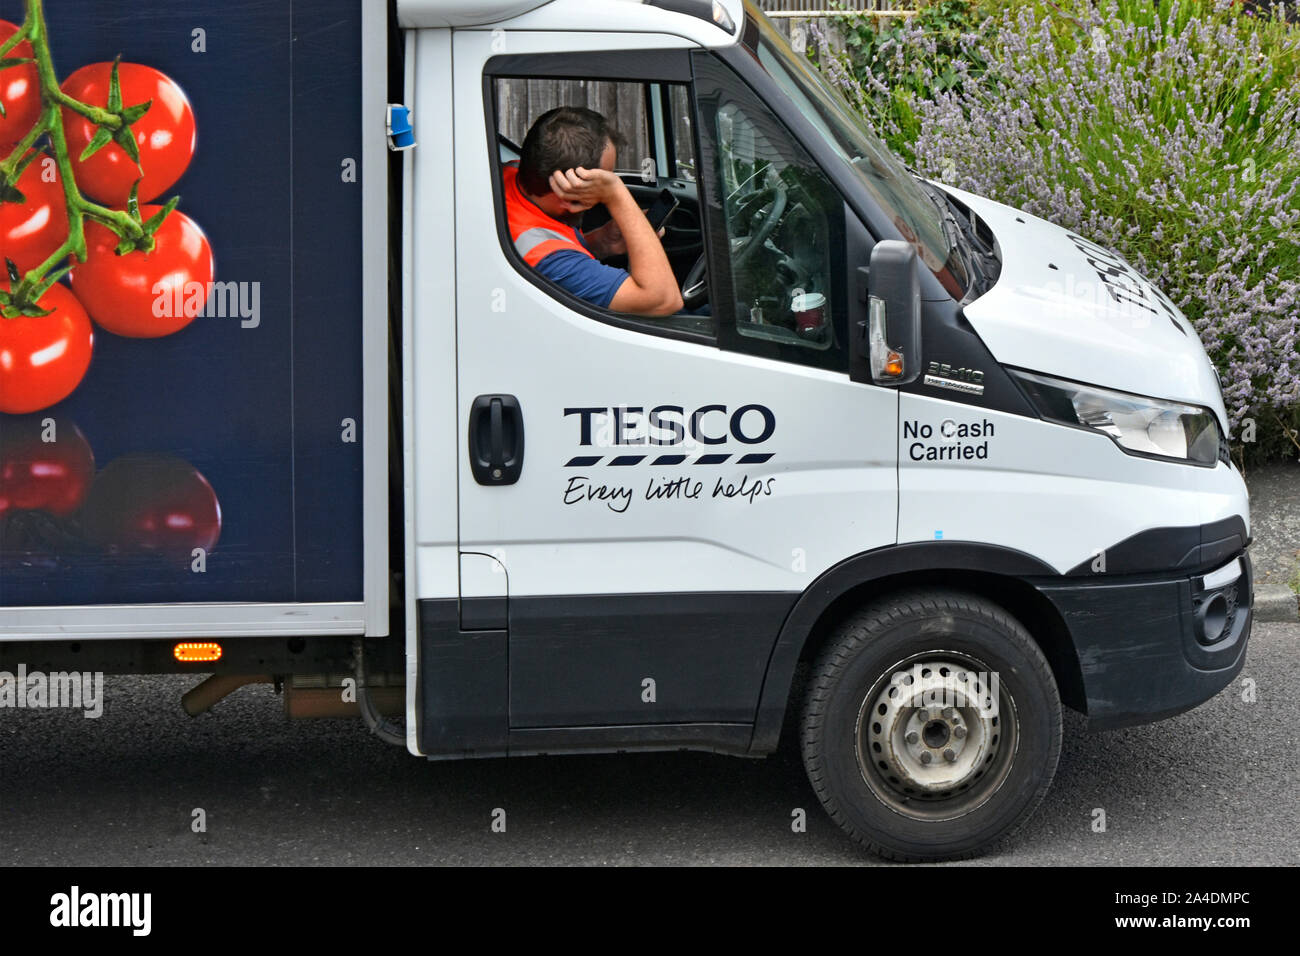 Street scene close up of Tesco supermarket home food supply chain delivery driver man arrives early &  waits in van for his customer Essex England UK Stock Photo